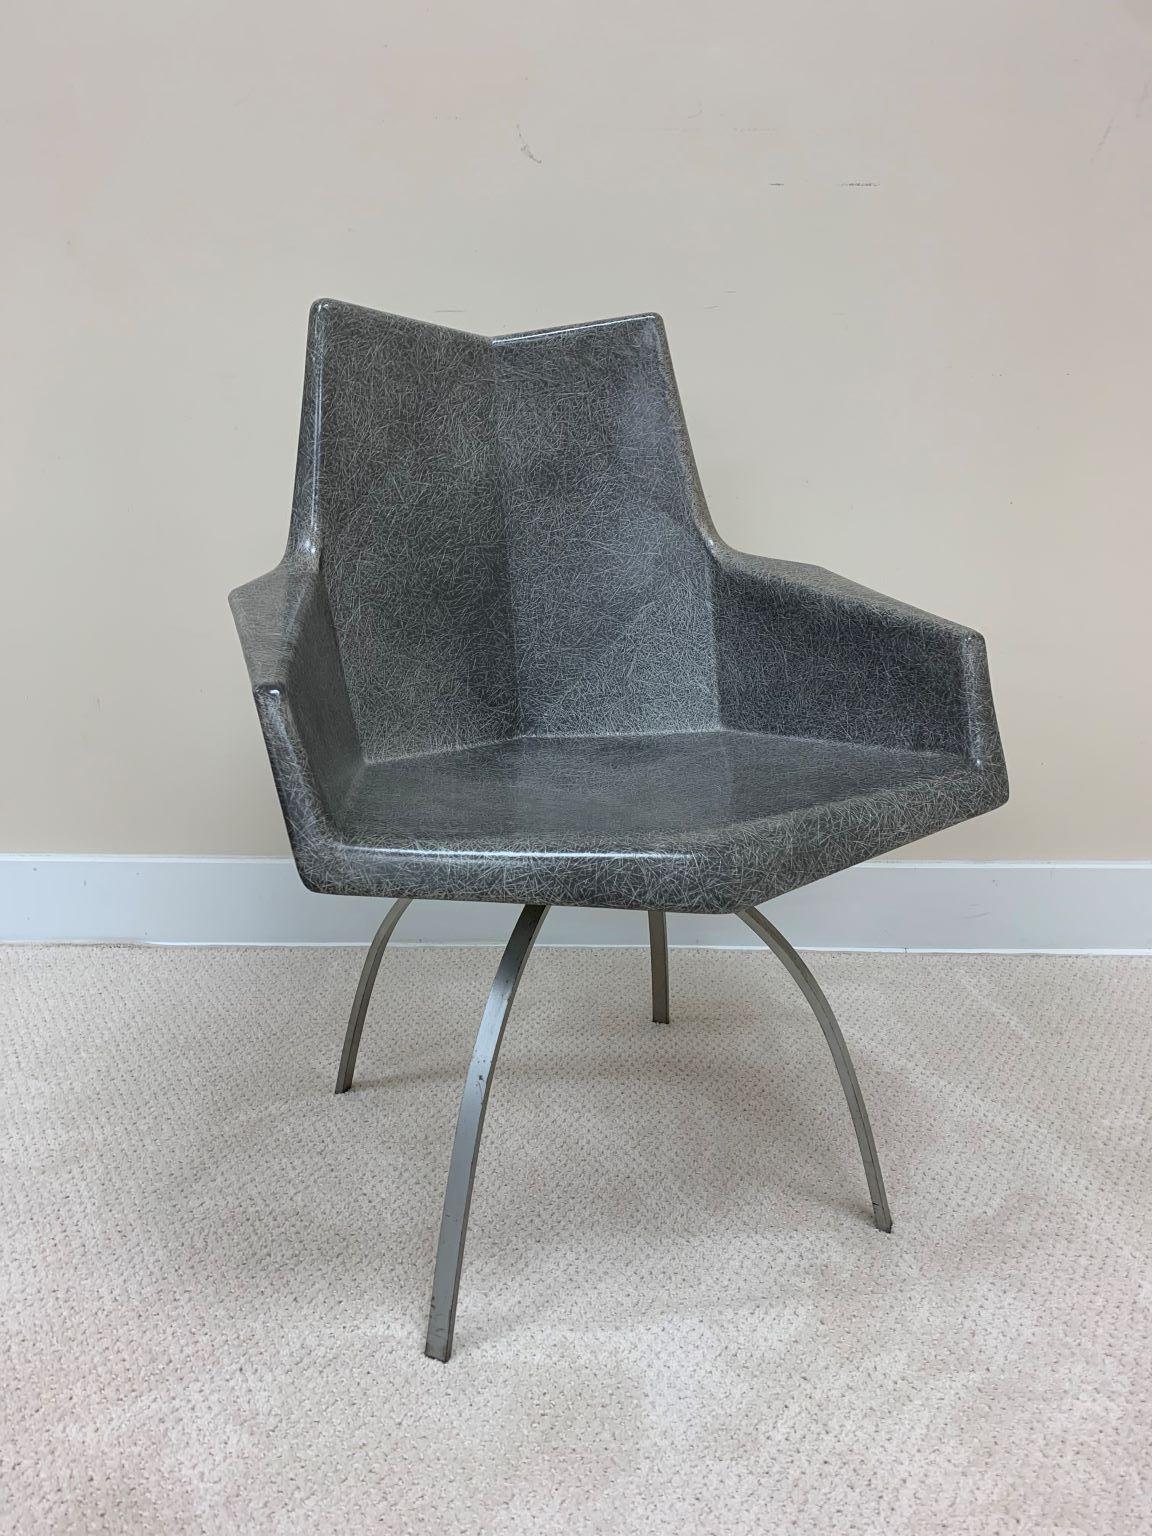 Steel Iconic and Rare Origami Fiberglass Chair with Spider Leg Base by Paul McCobb